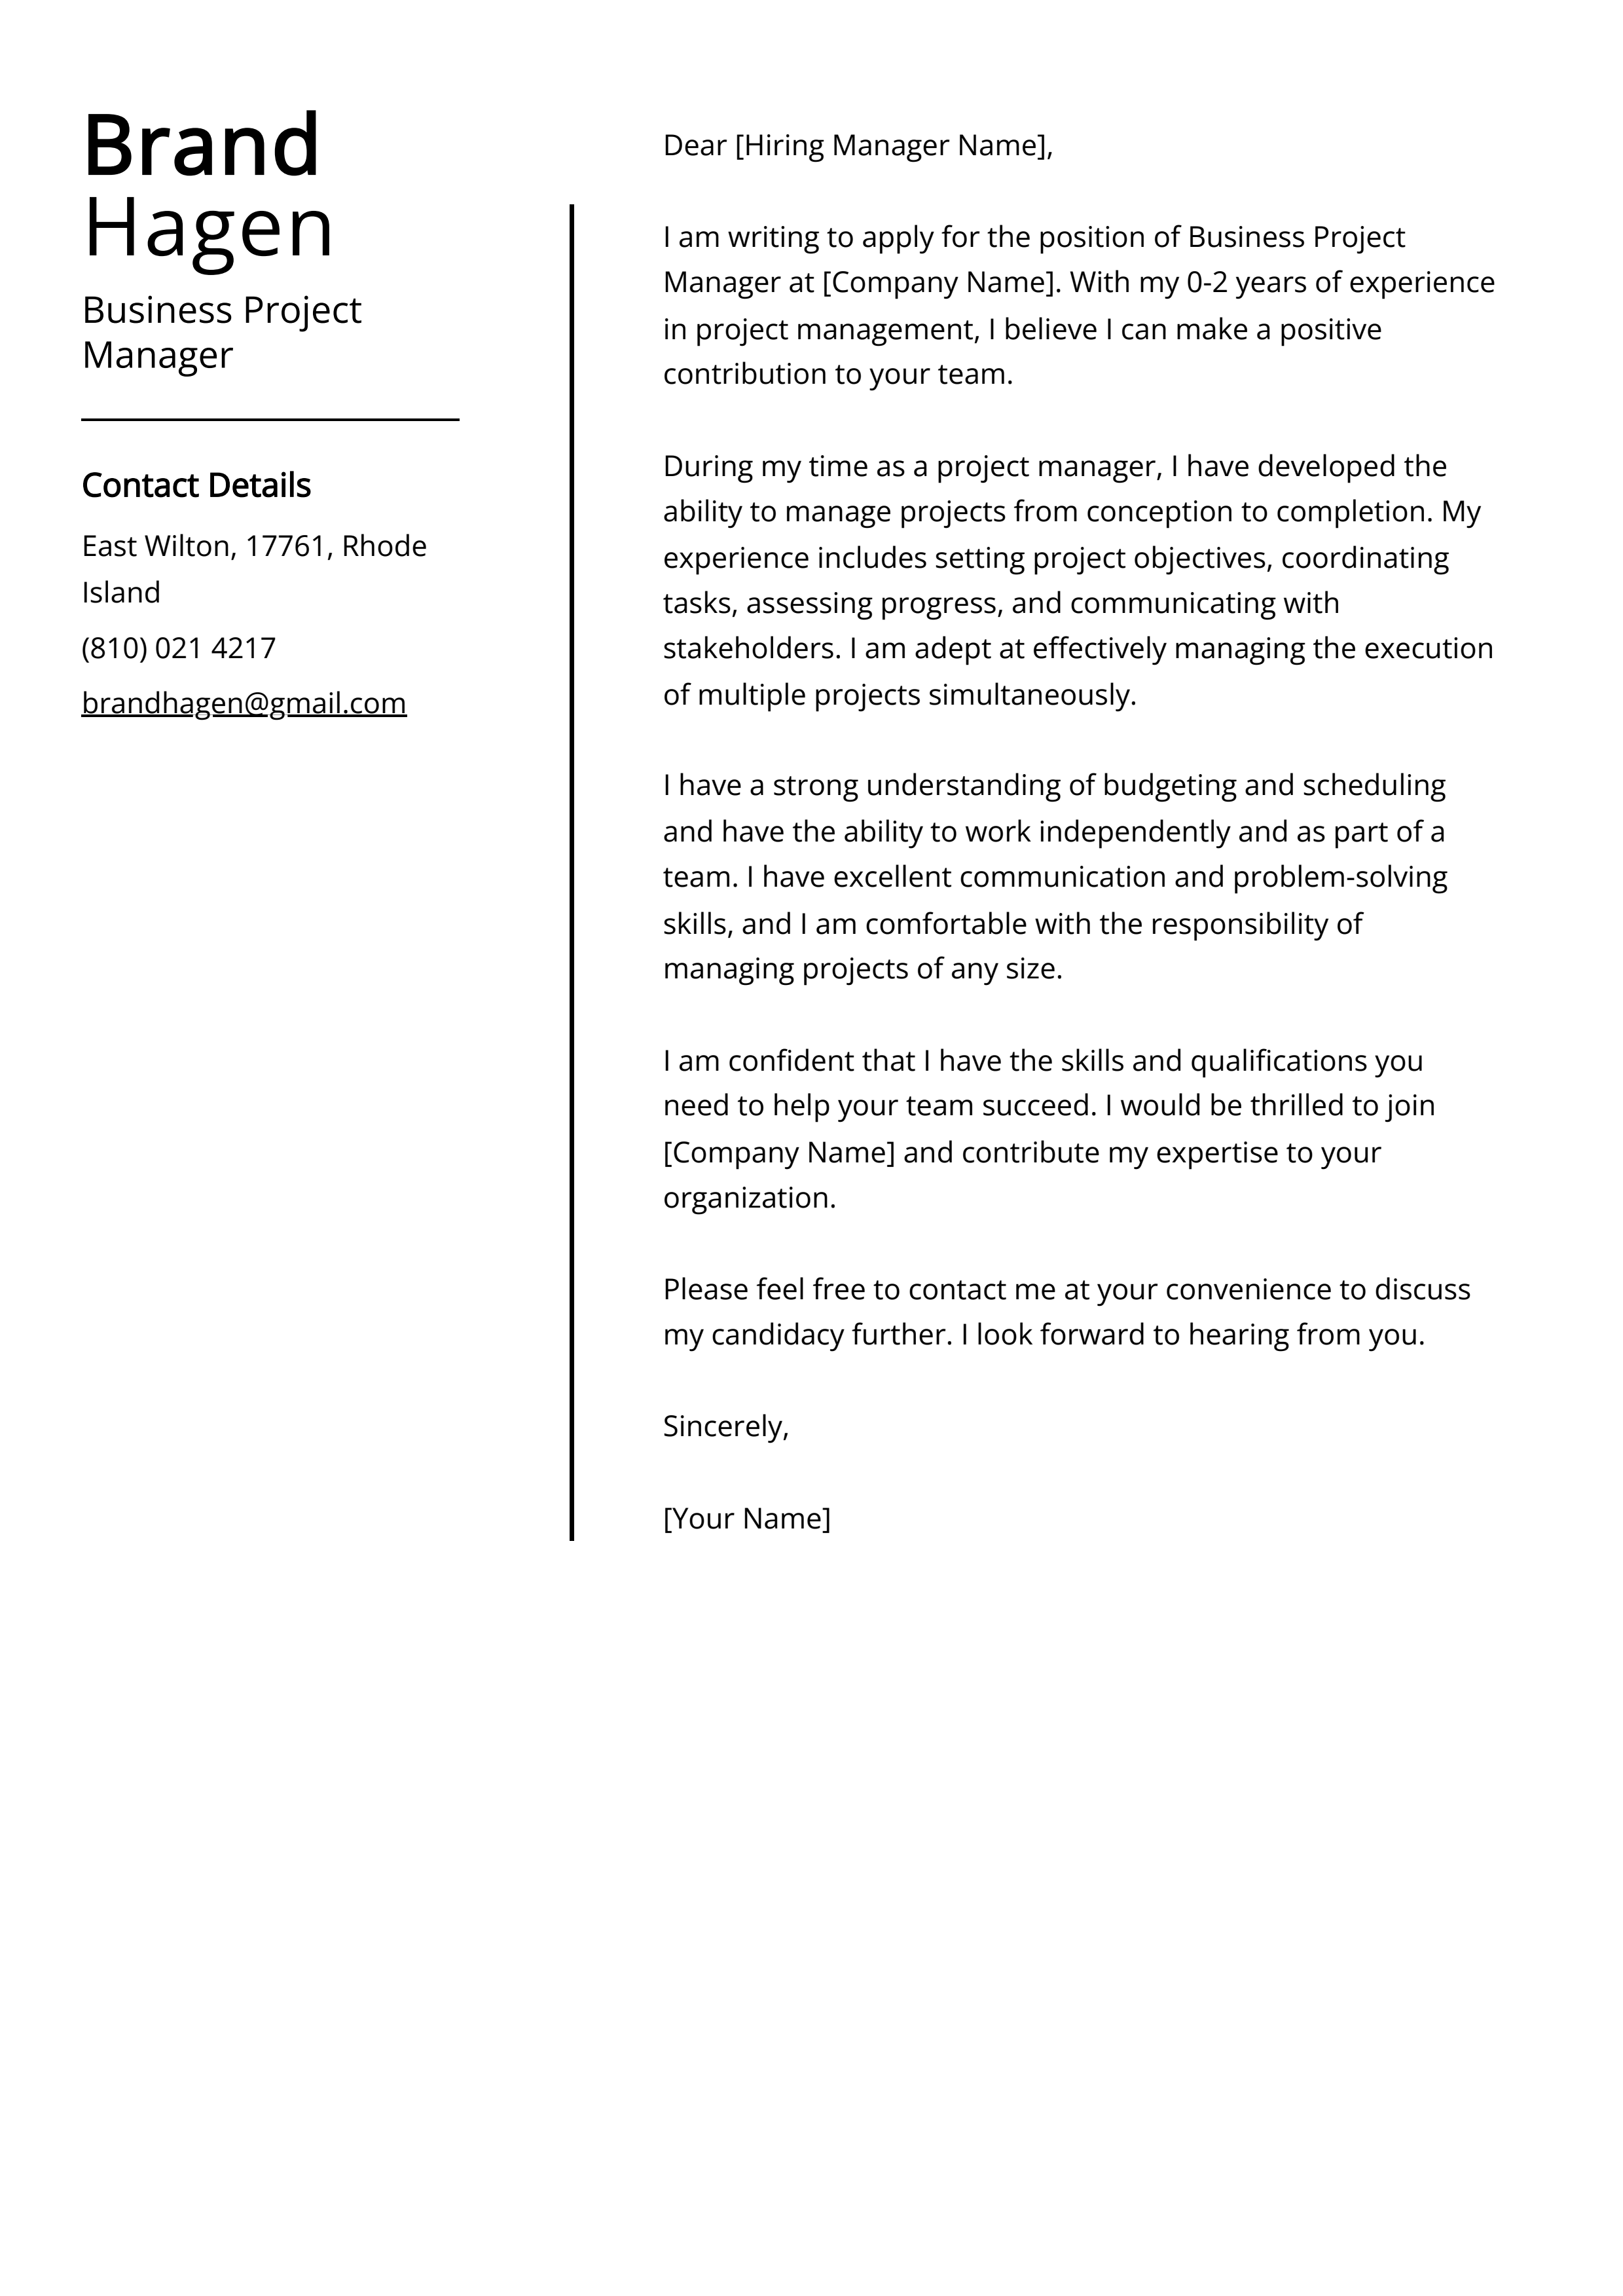 Business Project Manager Cover Letter Example